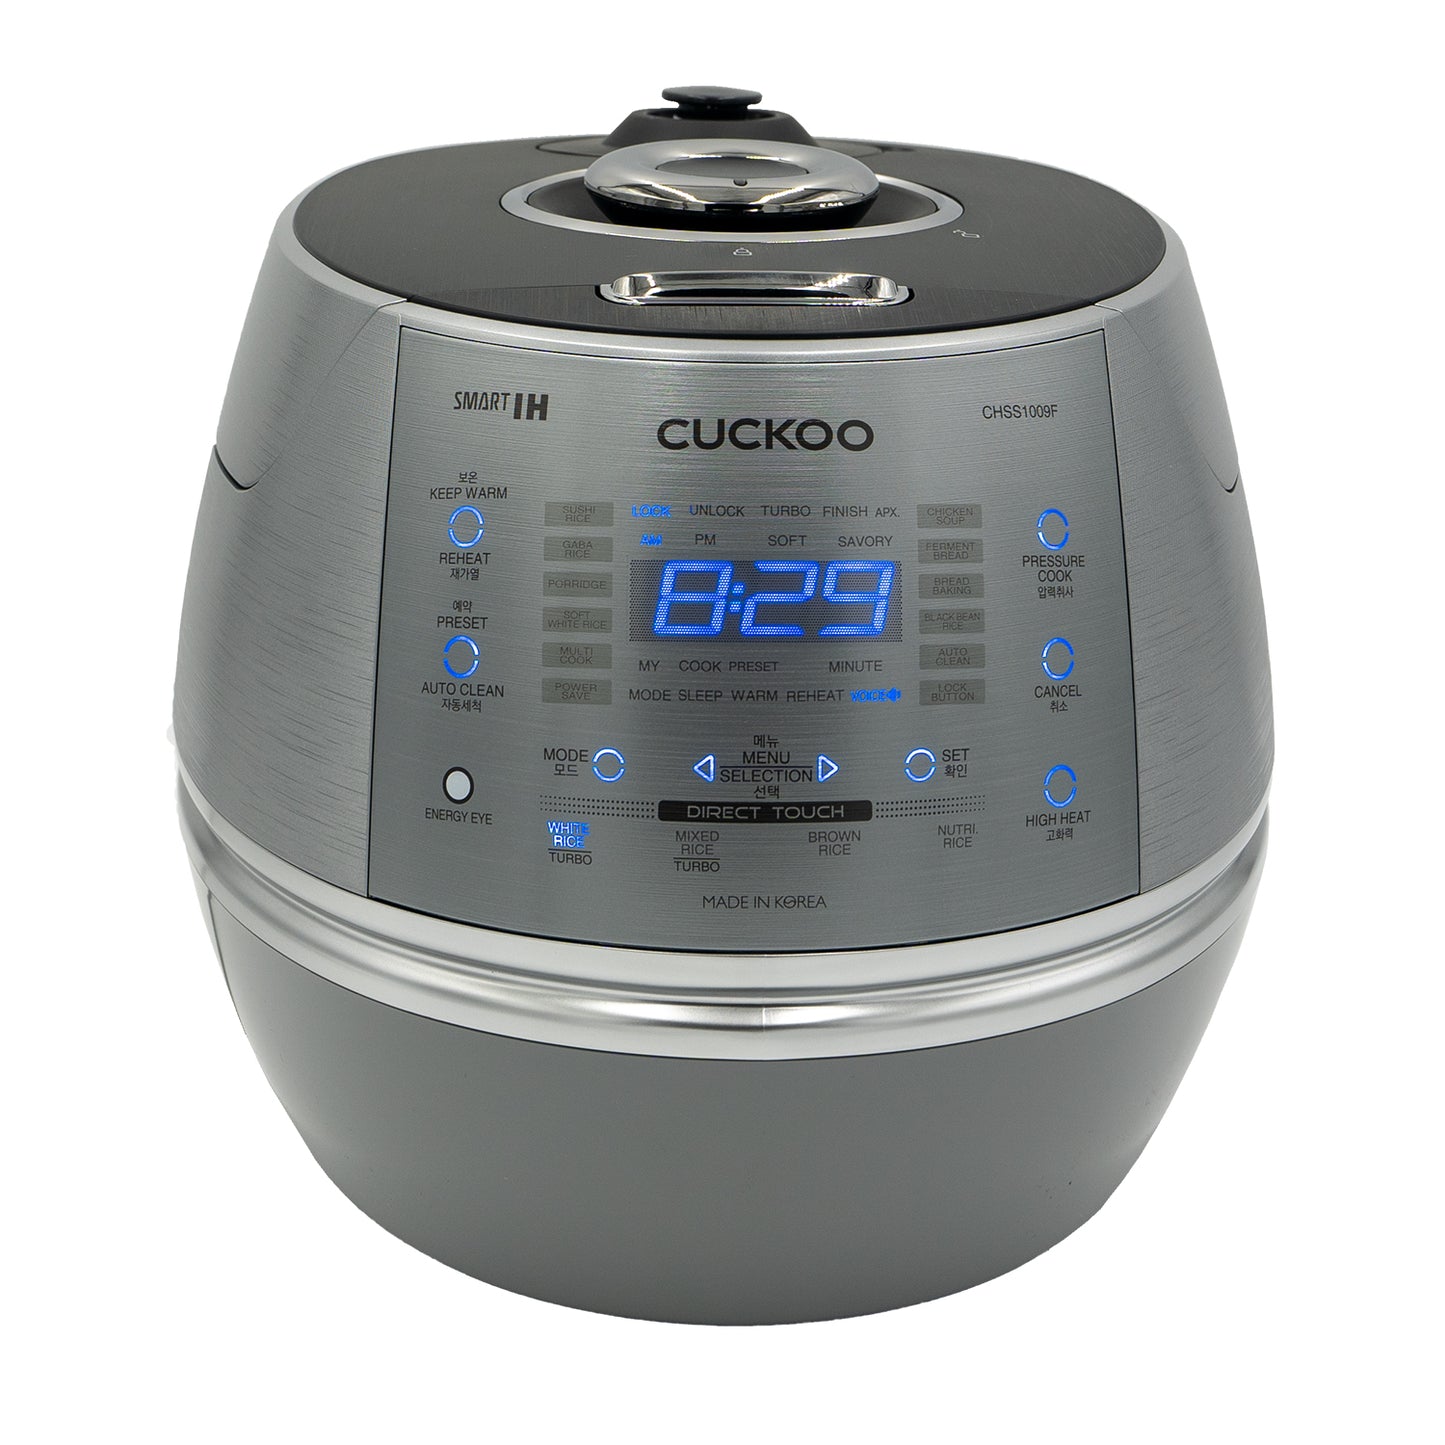 Cuckoo 6-Cup Induction Pressure Rice Cooker